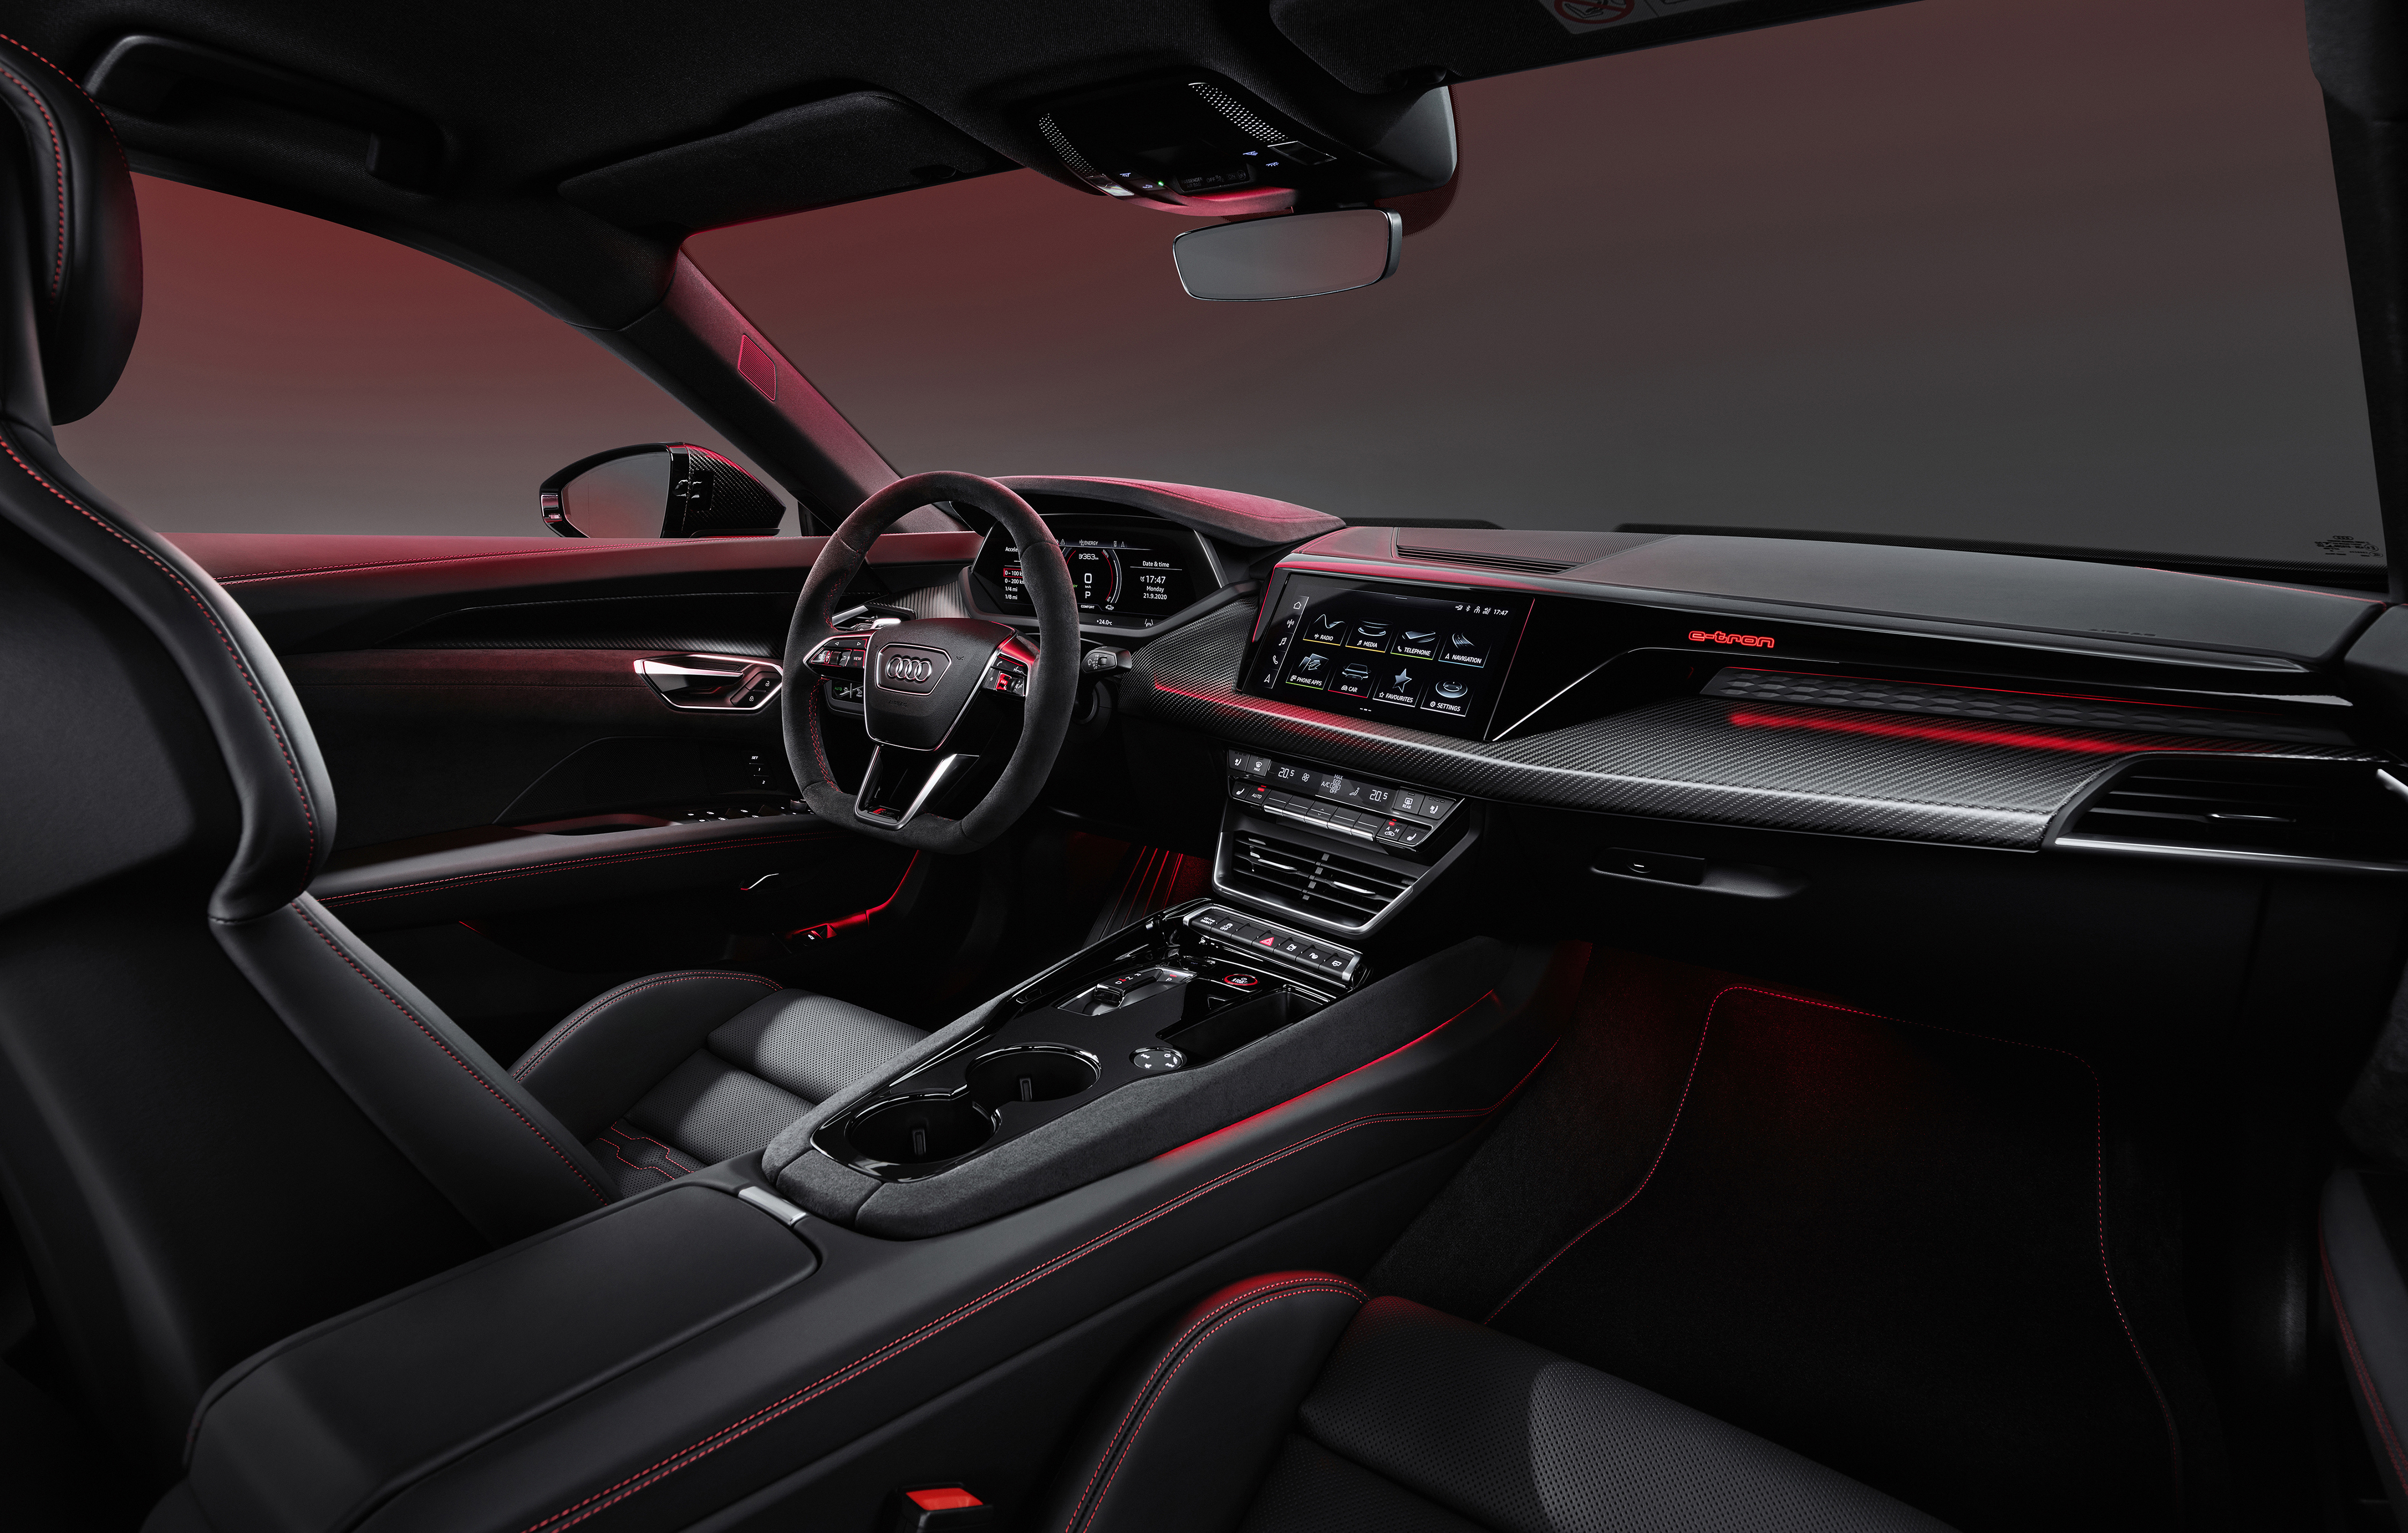 The interior of the Audi RS e-tron, featuring the low-slung driving position